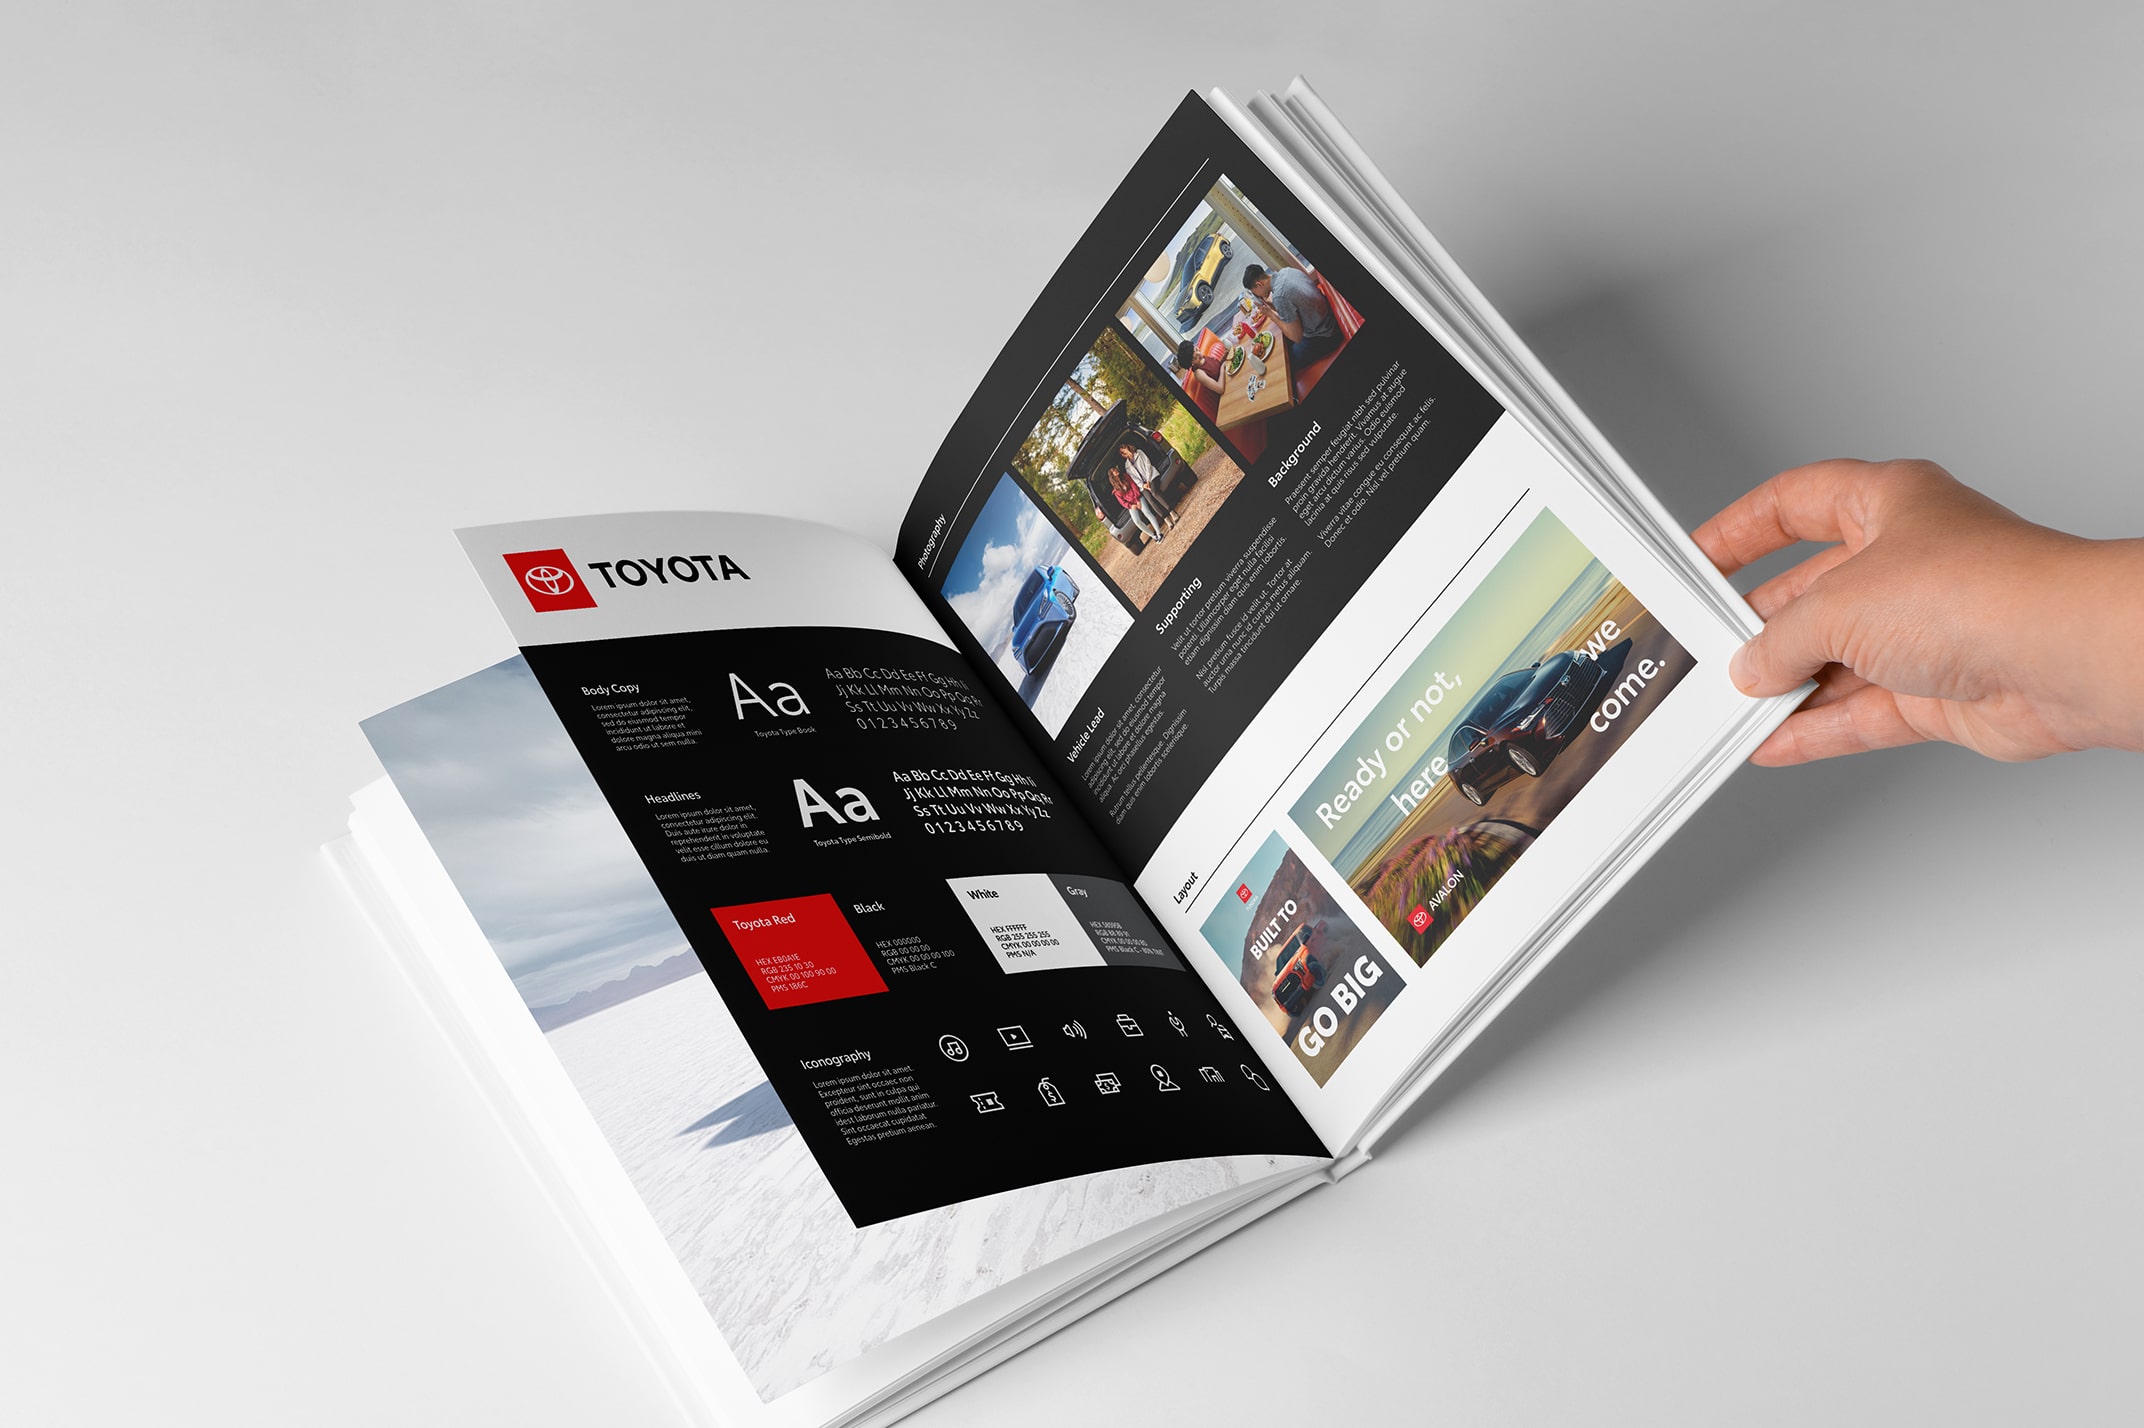 A hand flips through a Toyota Brand Handbook with pages about typography, layout and photography.